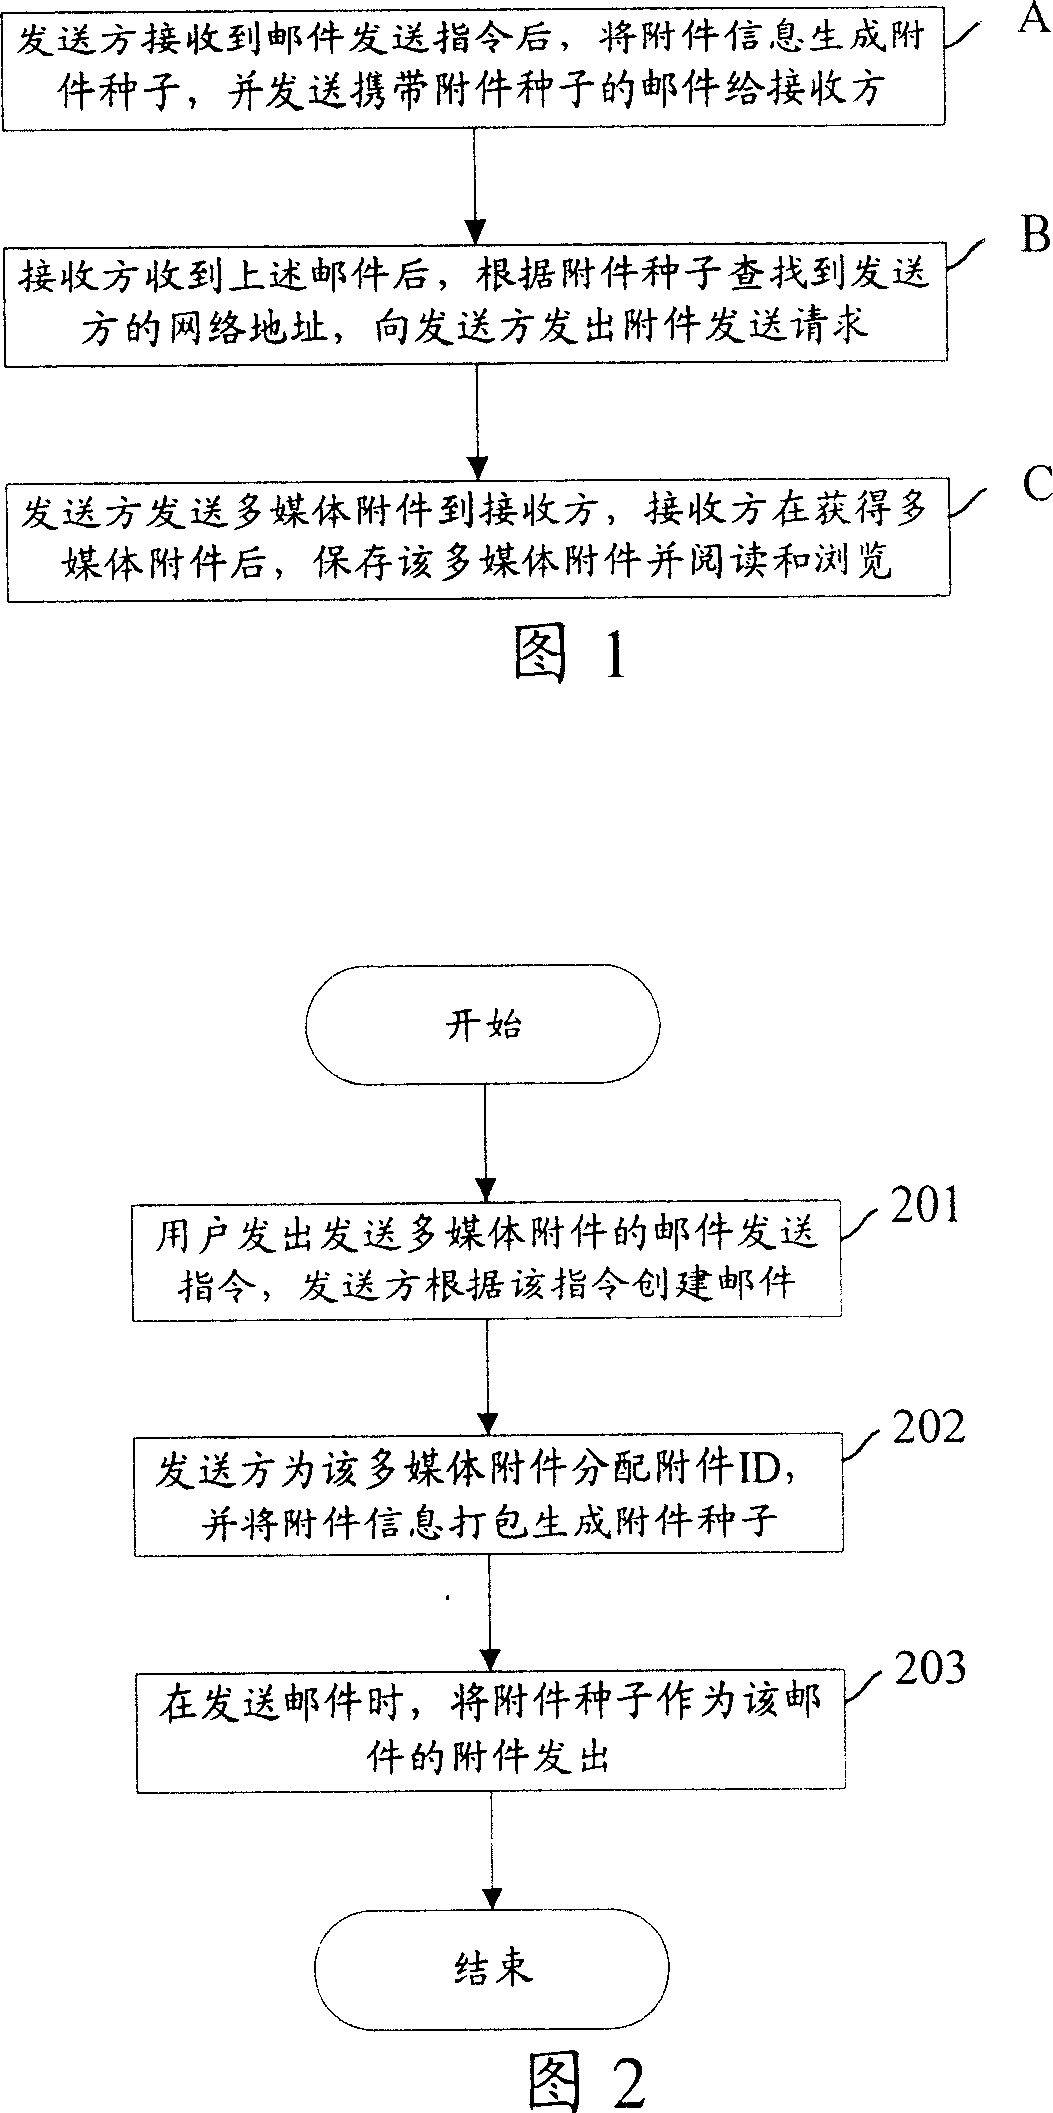 A transmission method and system for attachment of multimedia mail